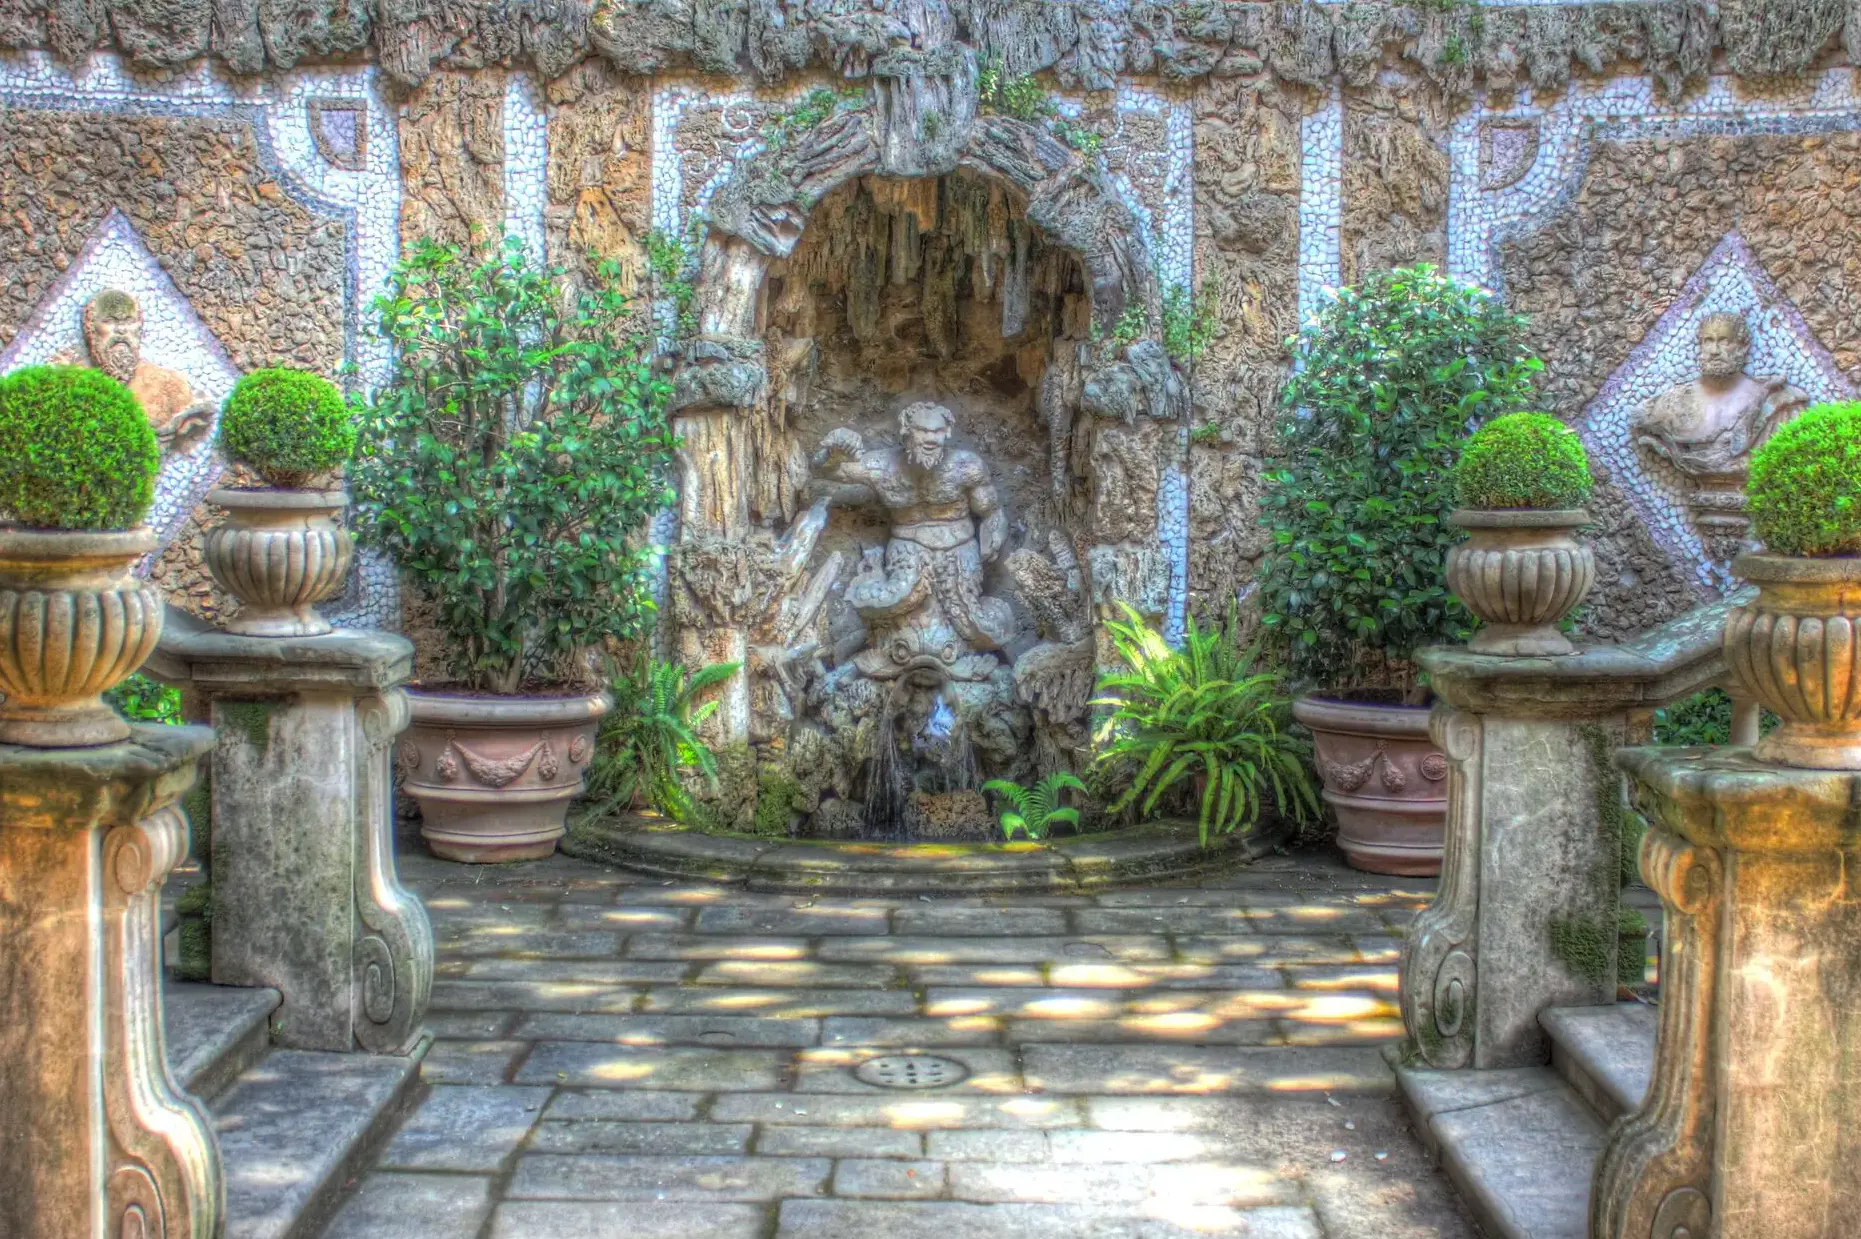 Fountain with the Greek god Triton at it's center, flanked by monumental staircases and several potted green plants.